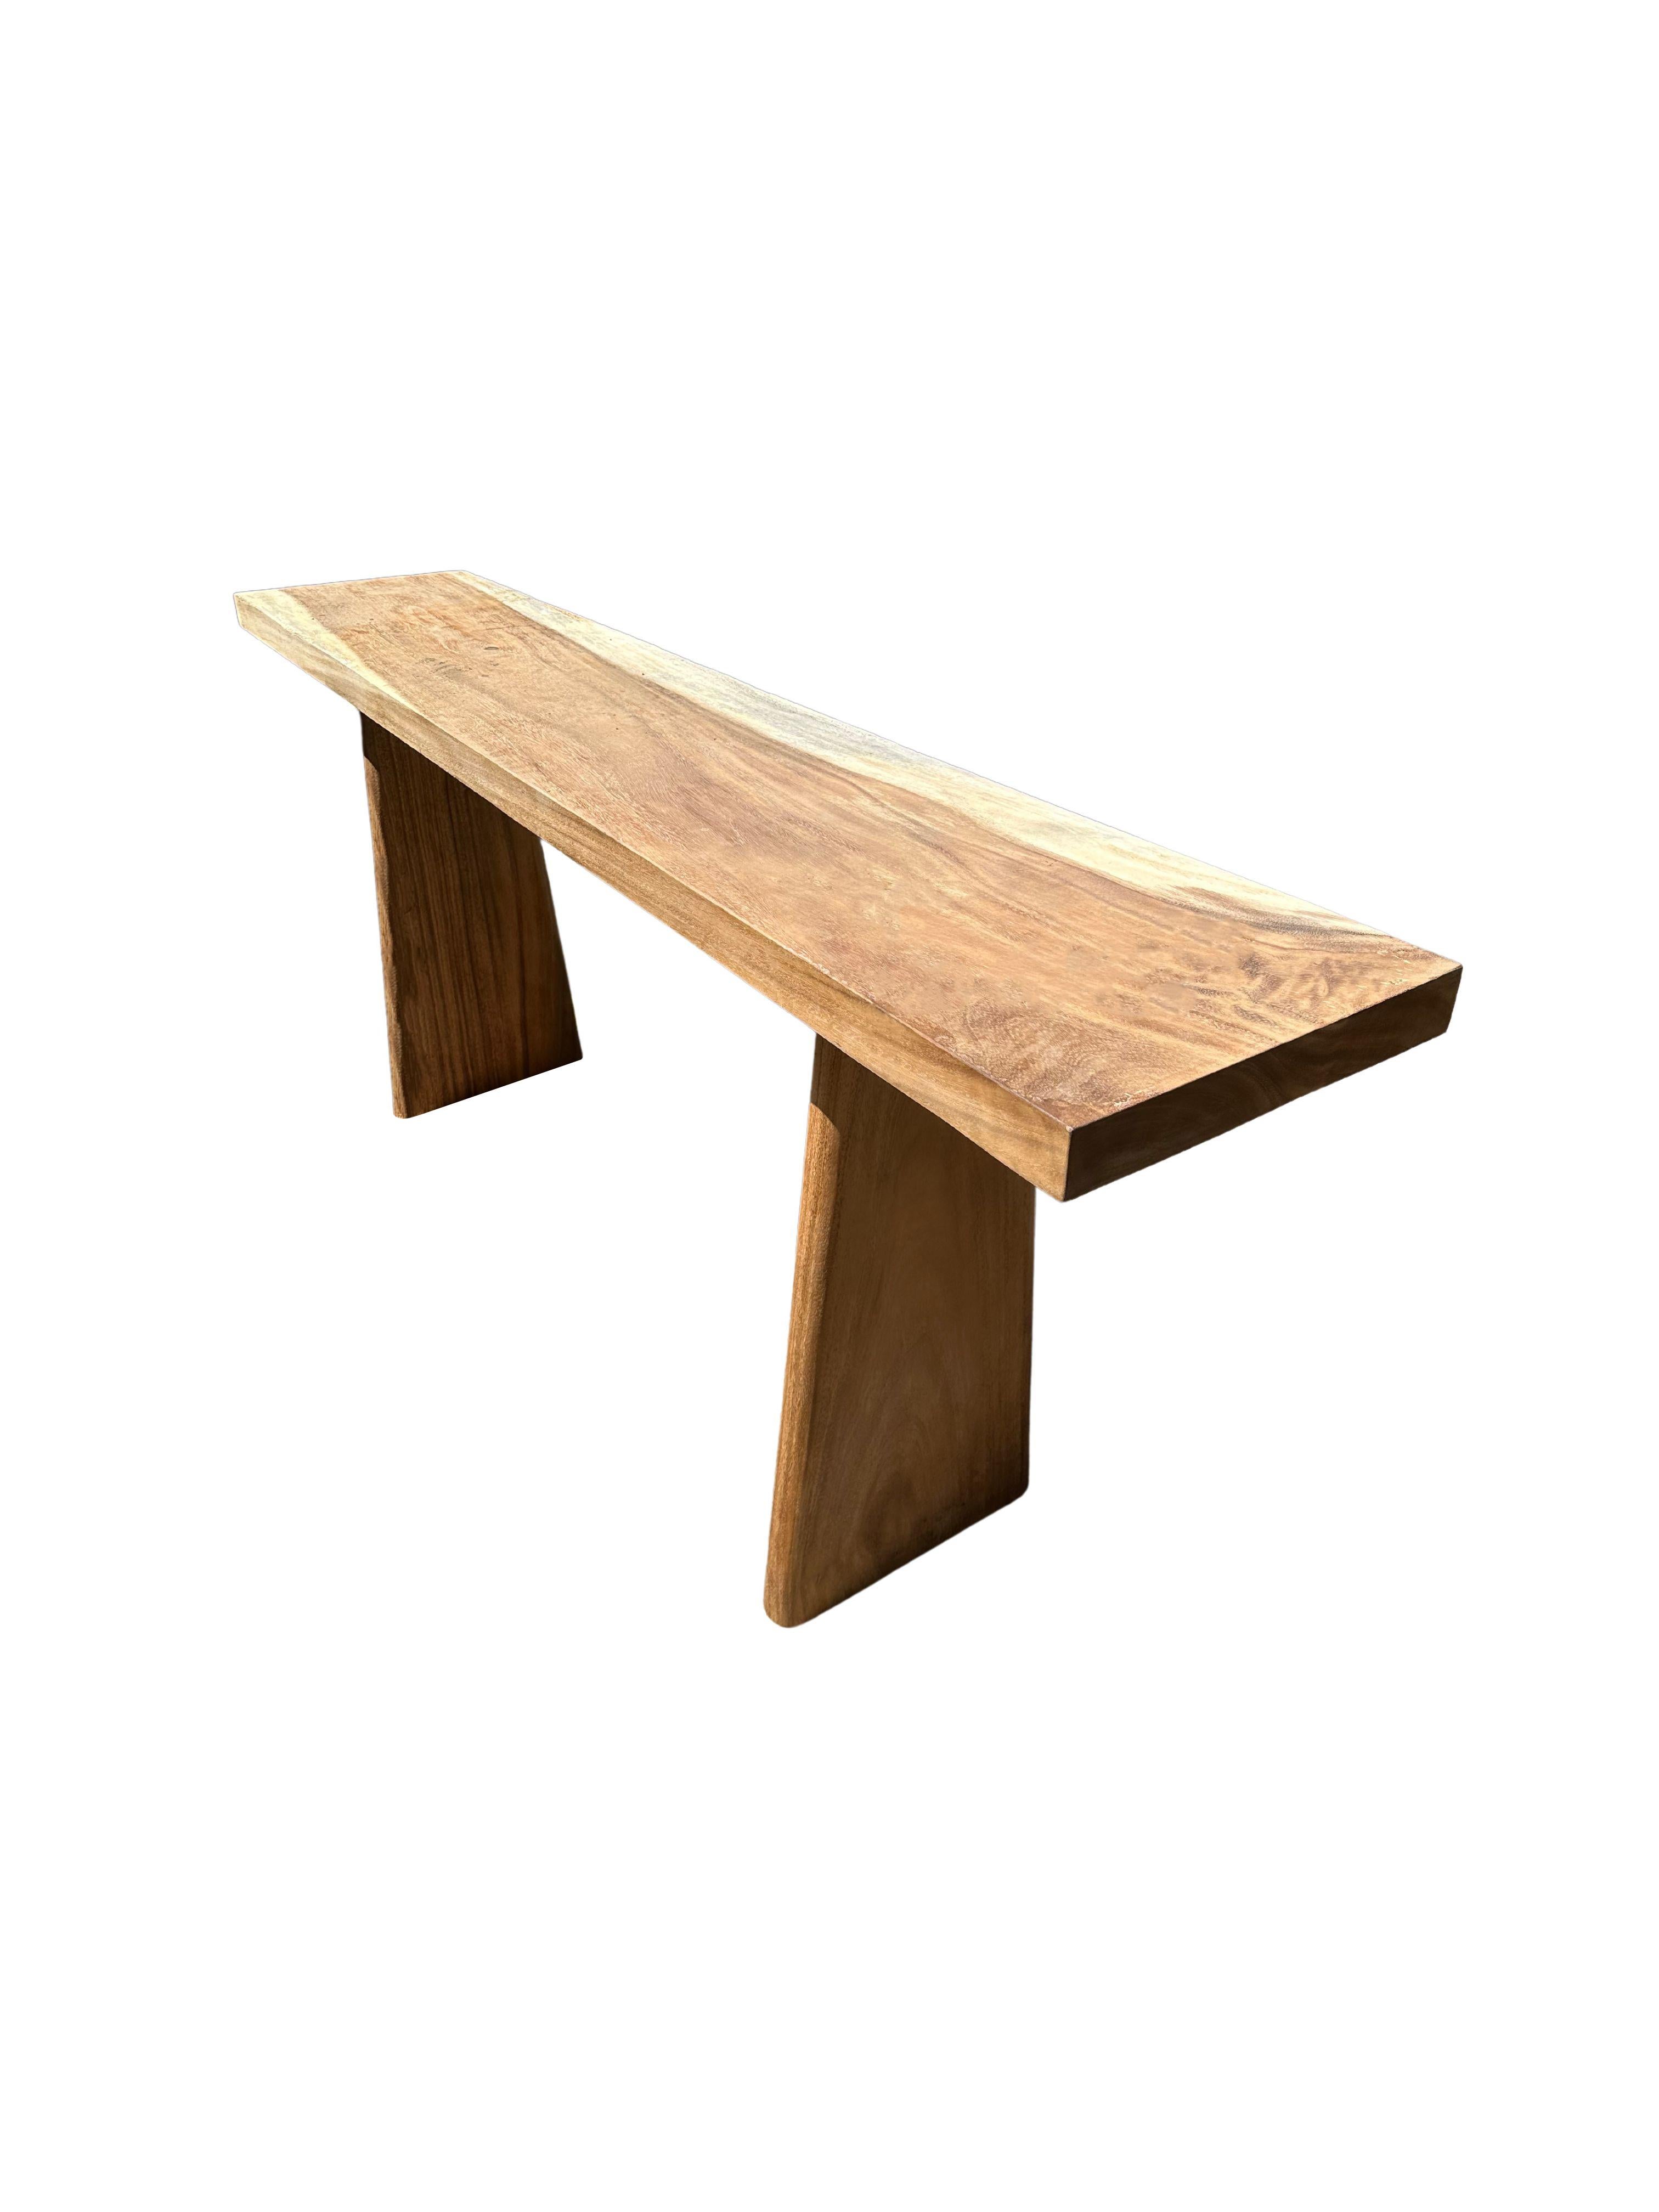 A sculptural mango wood console table crafted from solid mango wood. The table top sits atop two solid, narrow legs. The tables legs are angular and feature curved edges providing a wonderful mix of curved and straight lines to the table. A